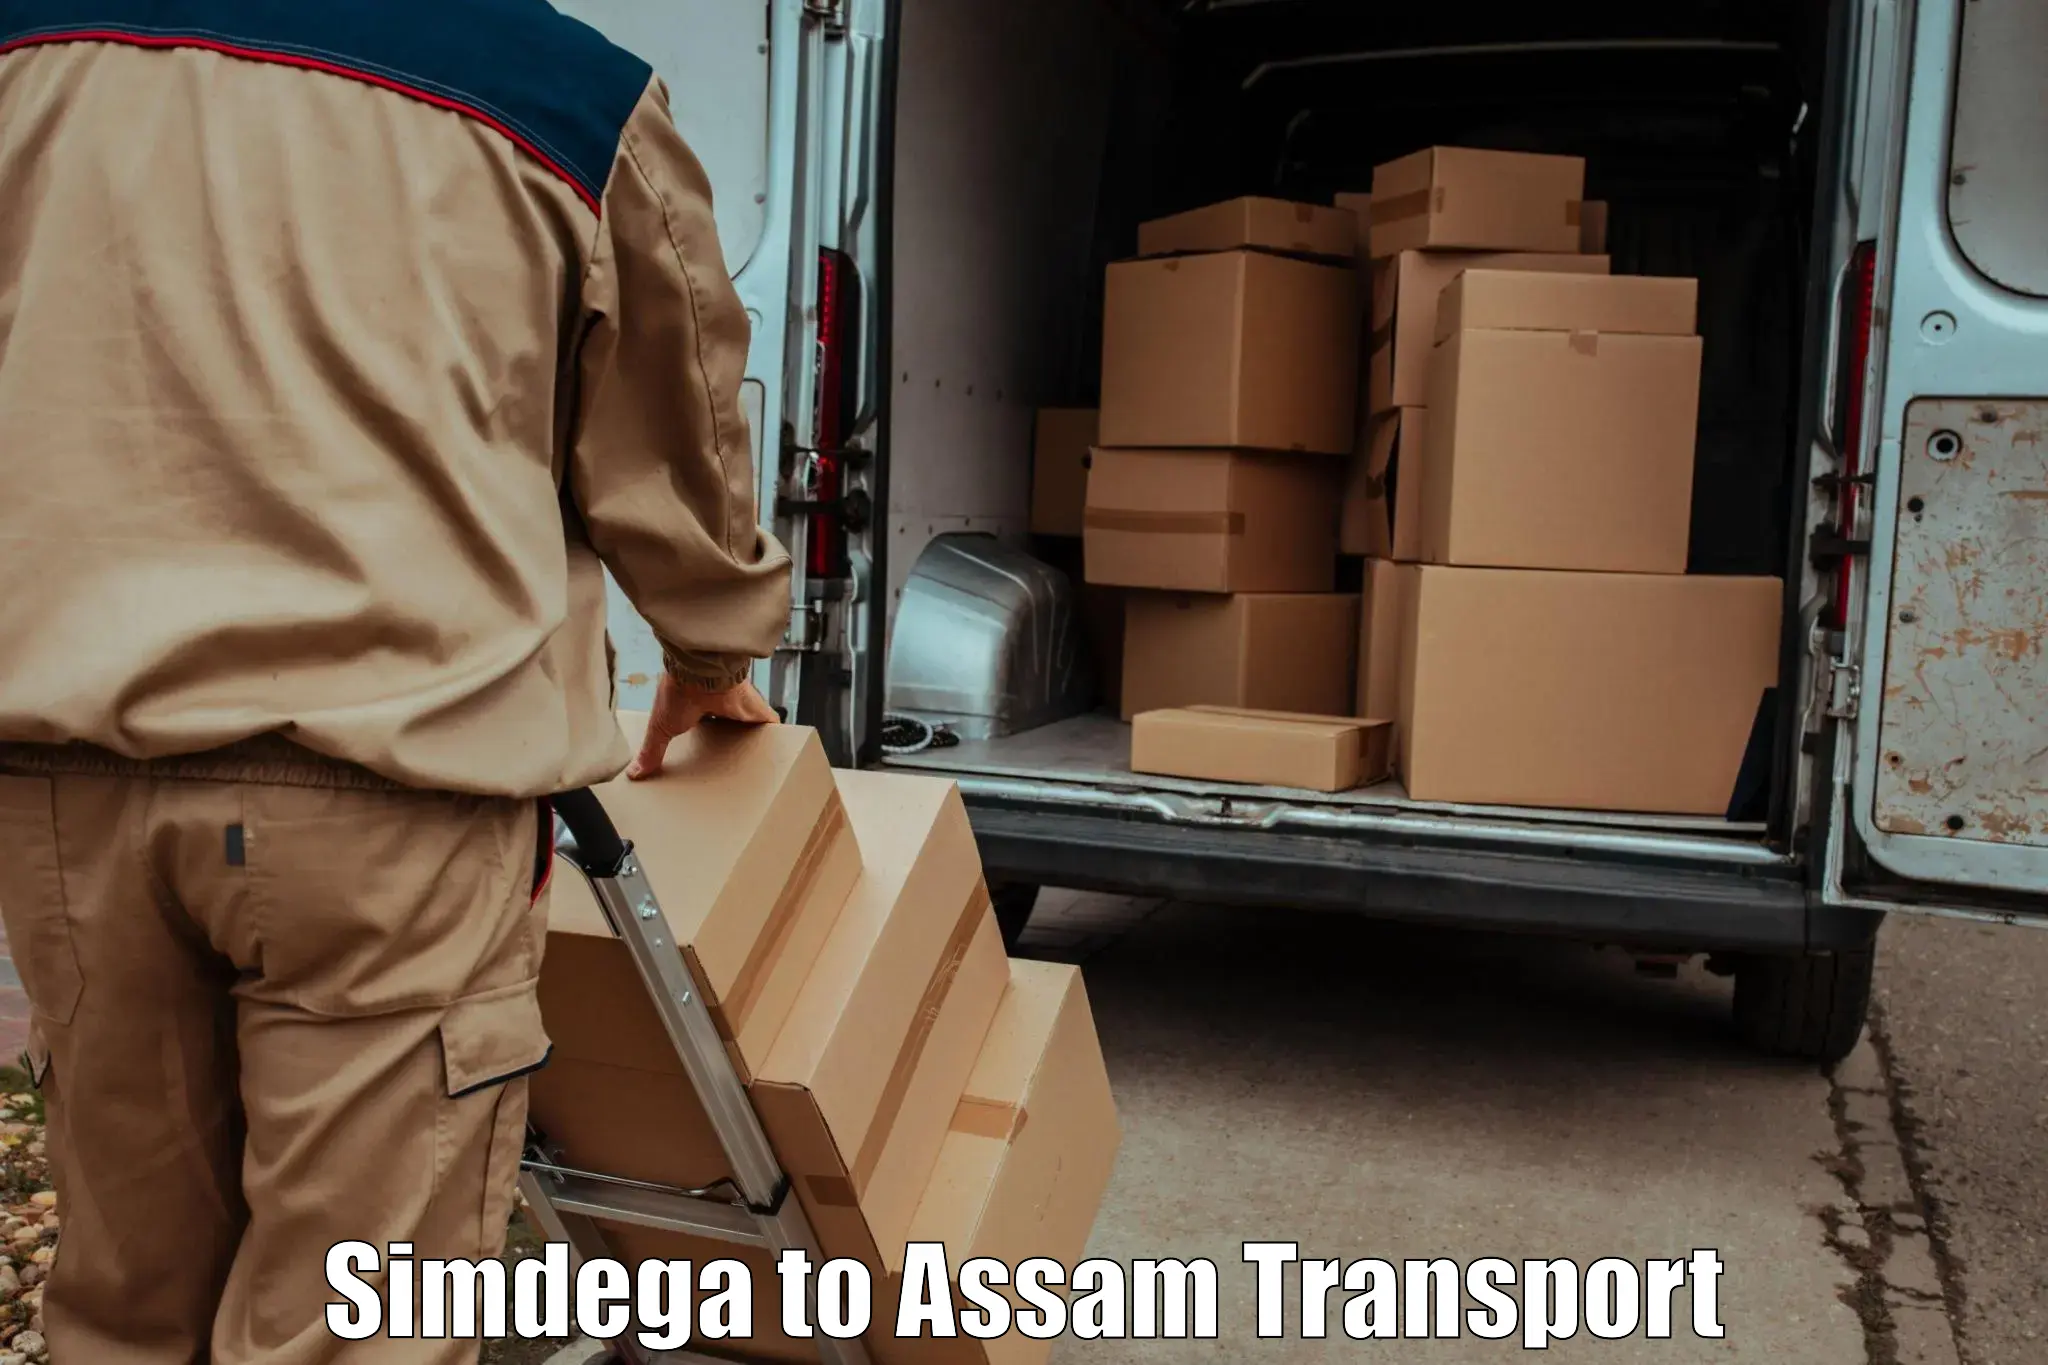 Best transport services in India Simdega to Assam